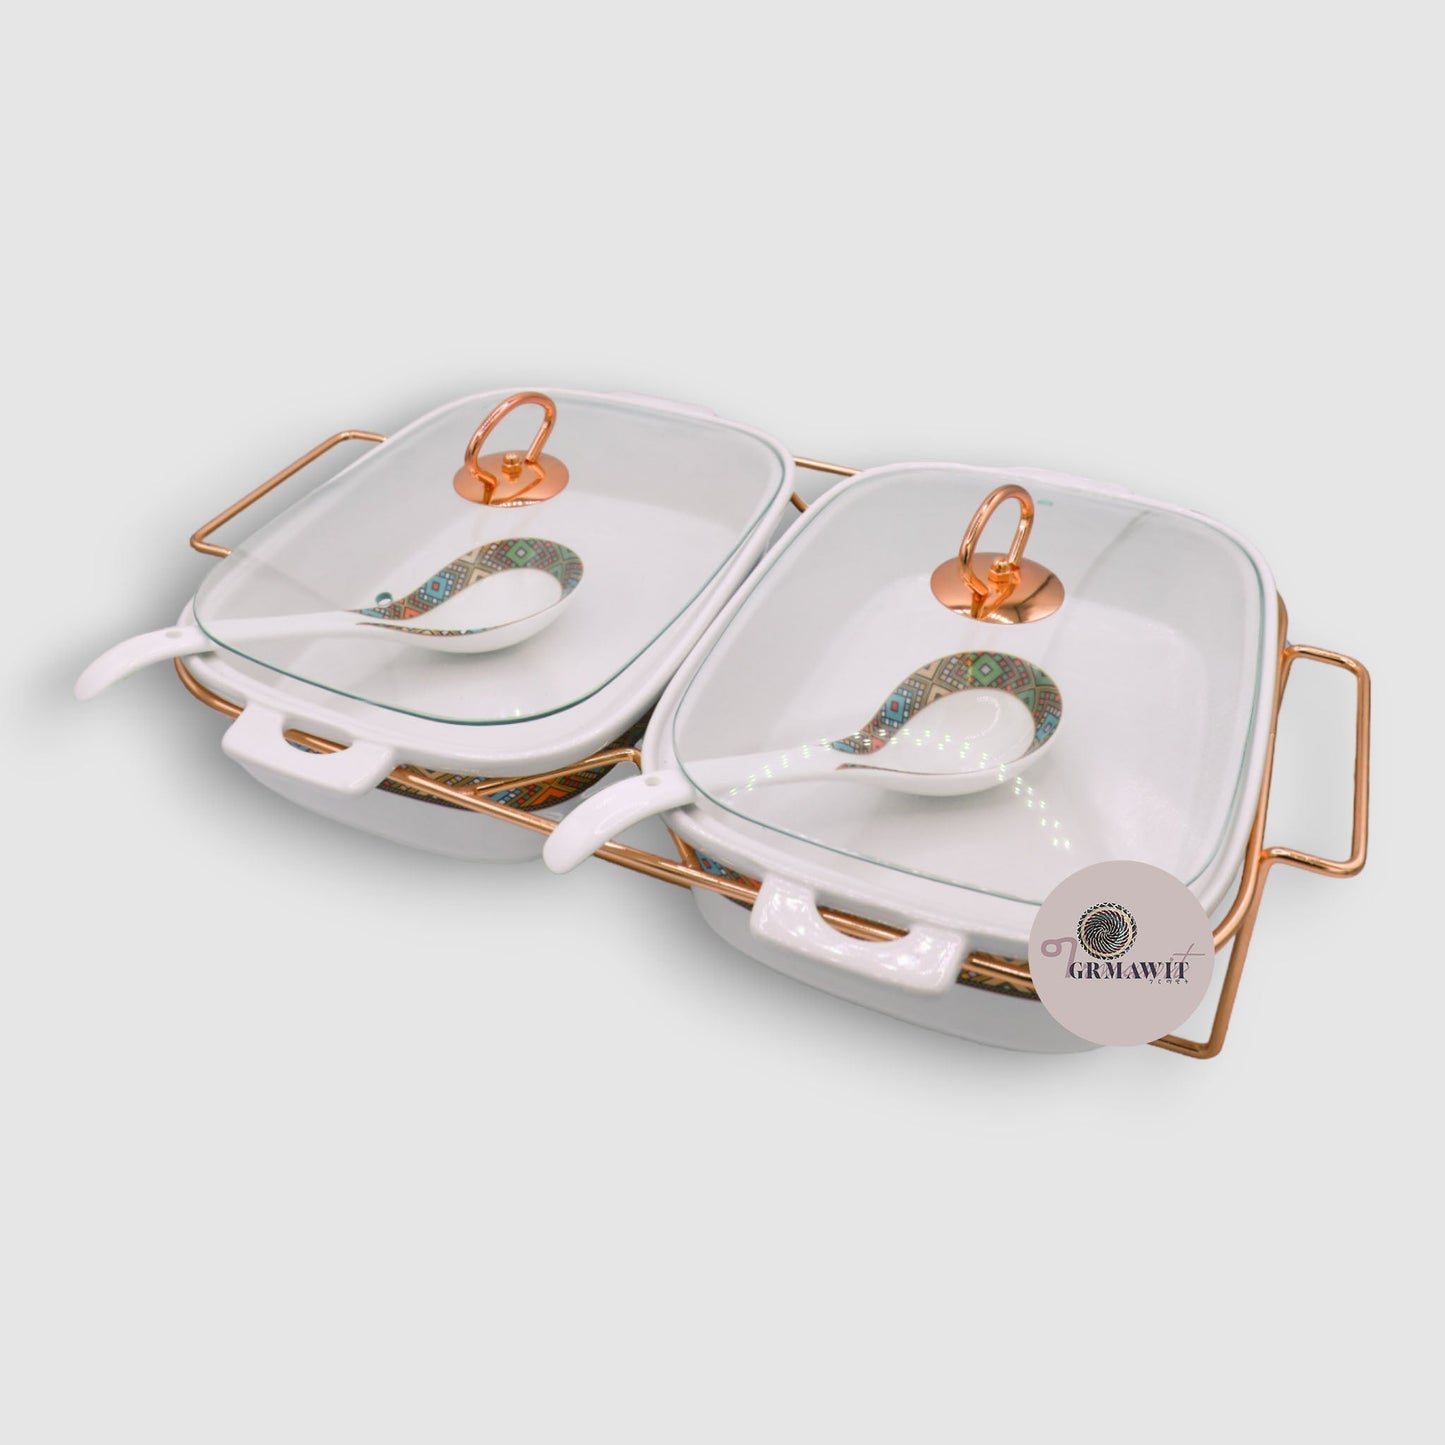 Traditional Ceramic Serving Tray Extras Grmawit 